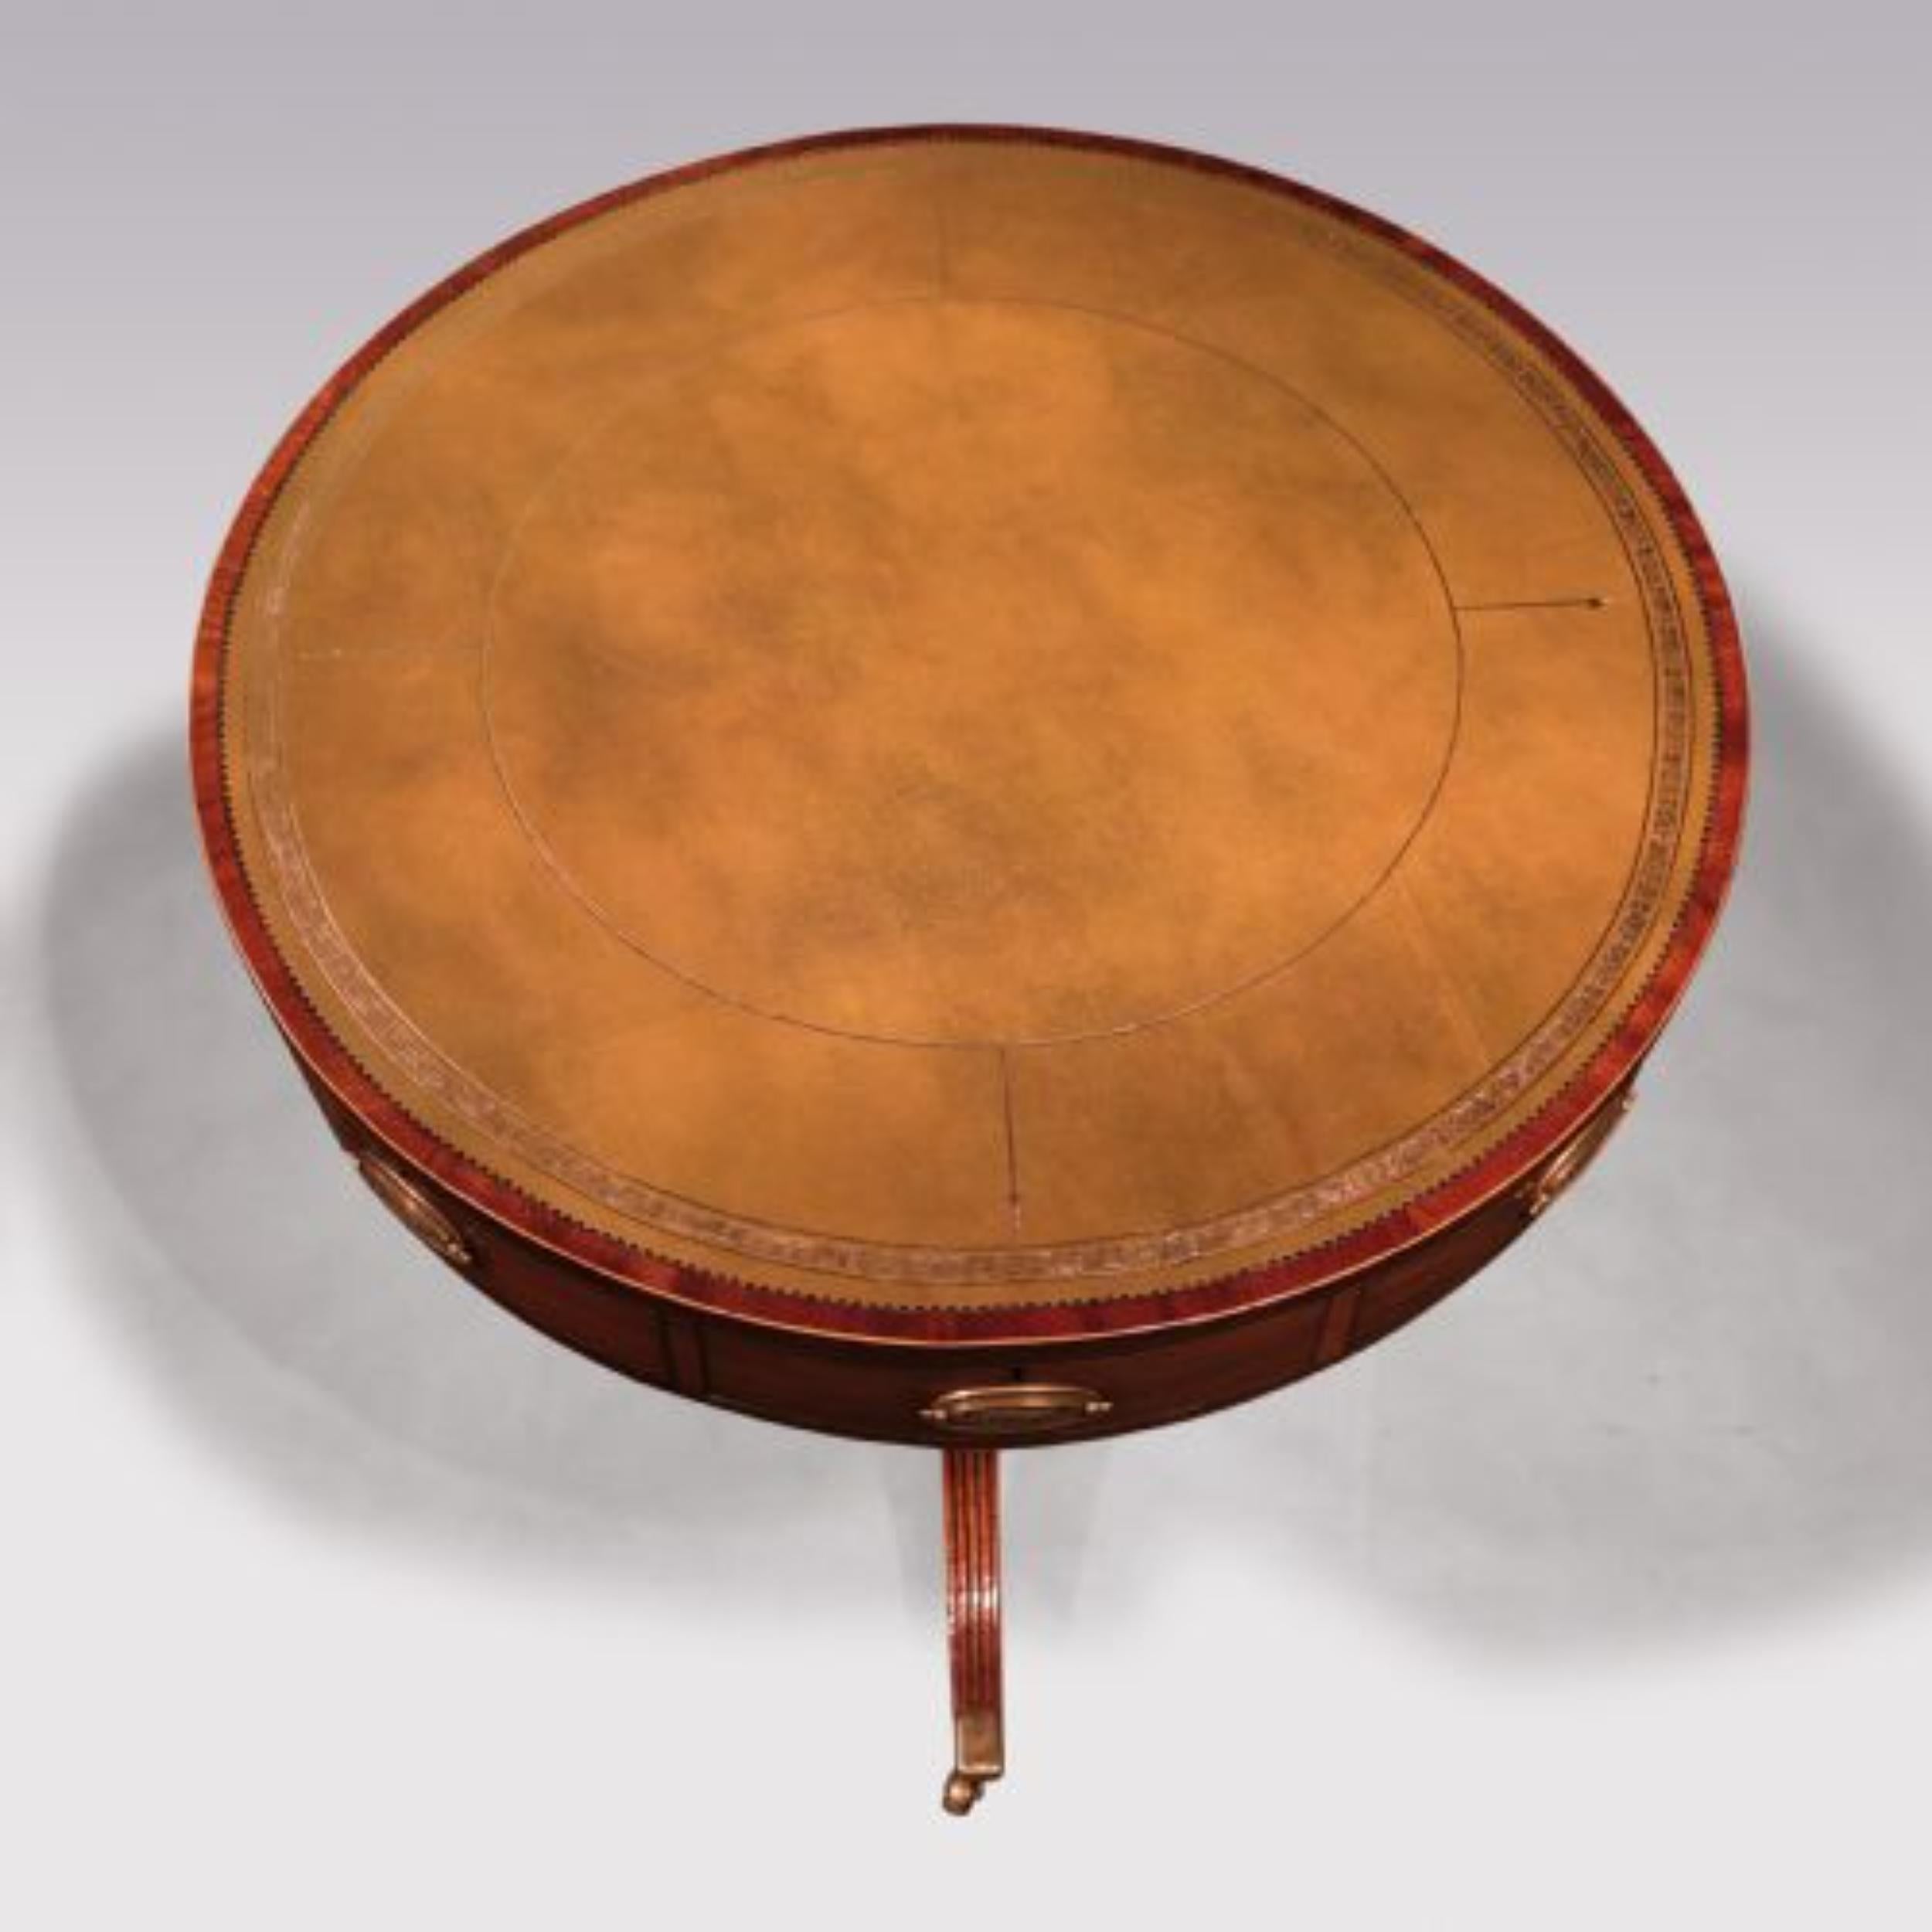 A George III period mahogany revolving Library Drum Table of attractive small proportions, having faded green leather gilt tooled boxwood strung crossbanded circular top, above 4 real & 4 dummy drawers raised on elegant gun-barrel stem & reeded 3